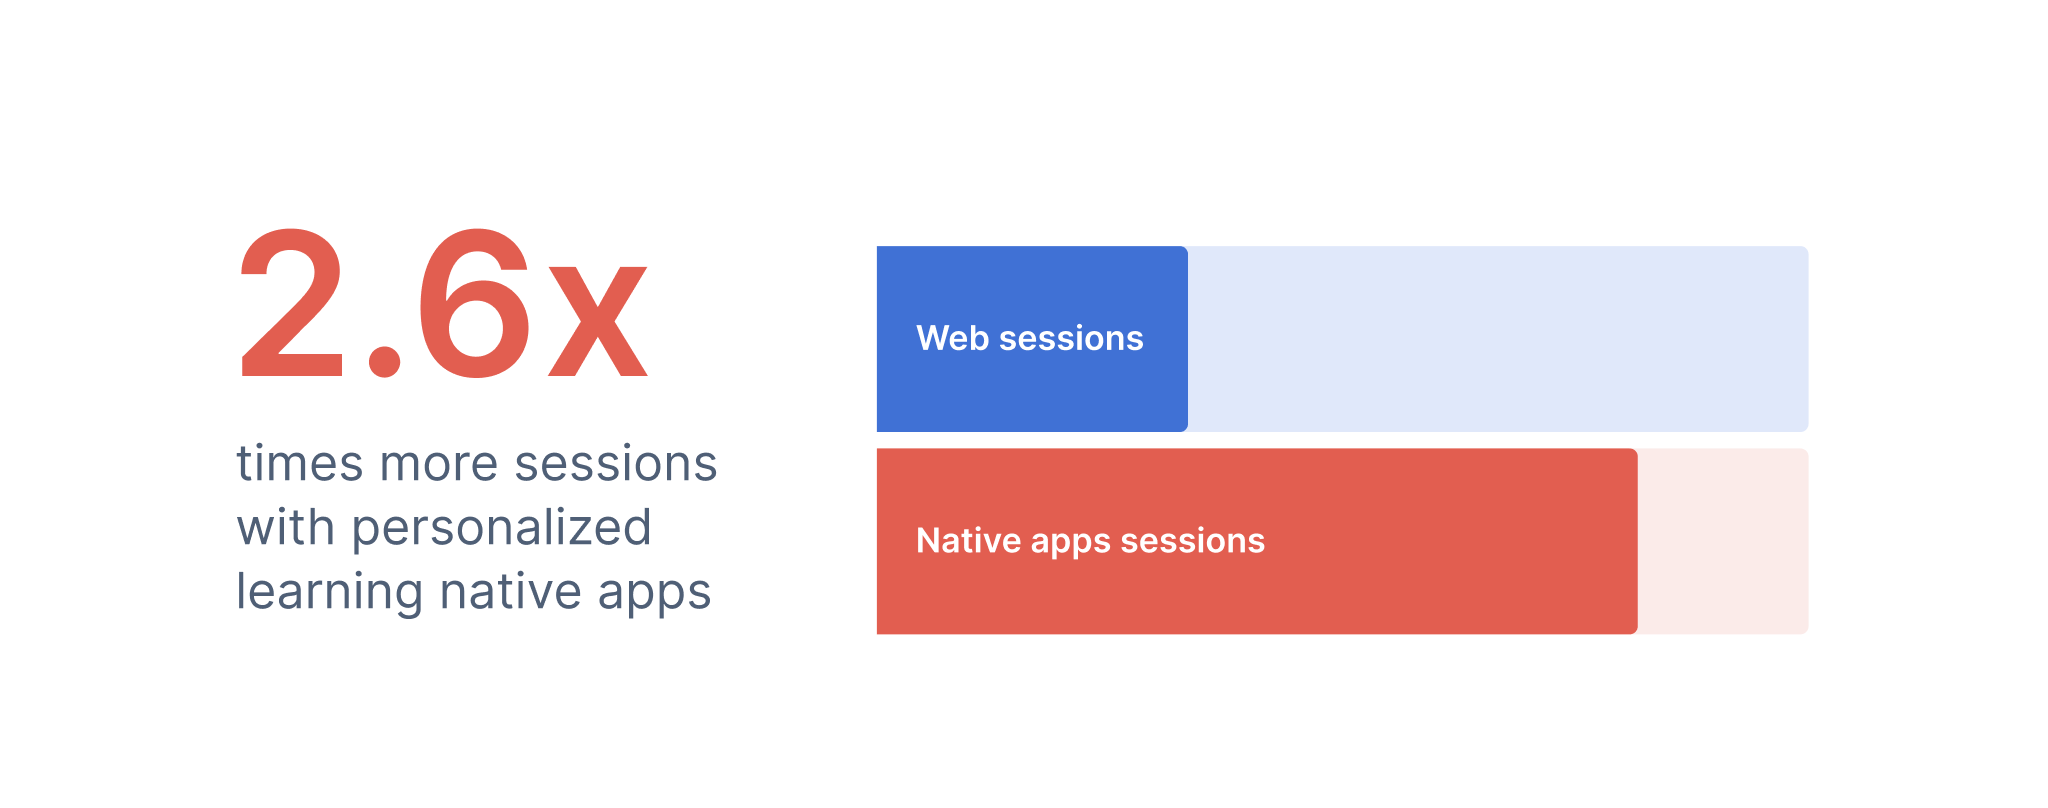 native apps versue web sessions